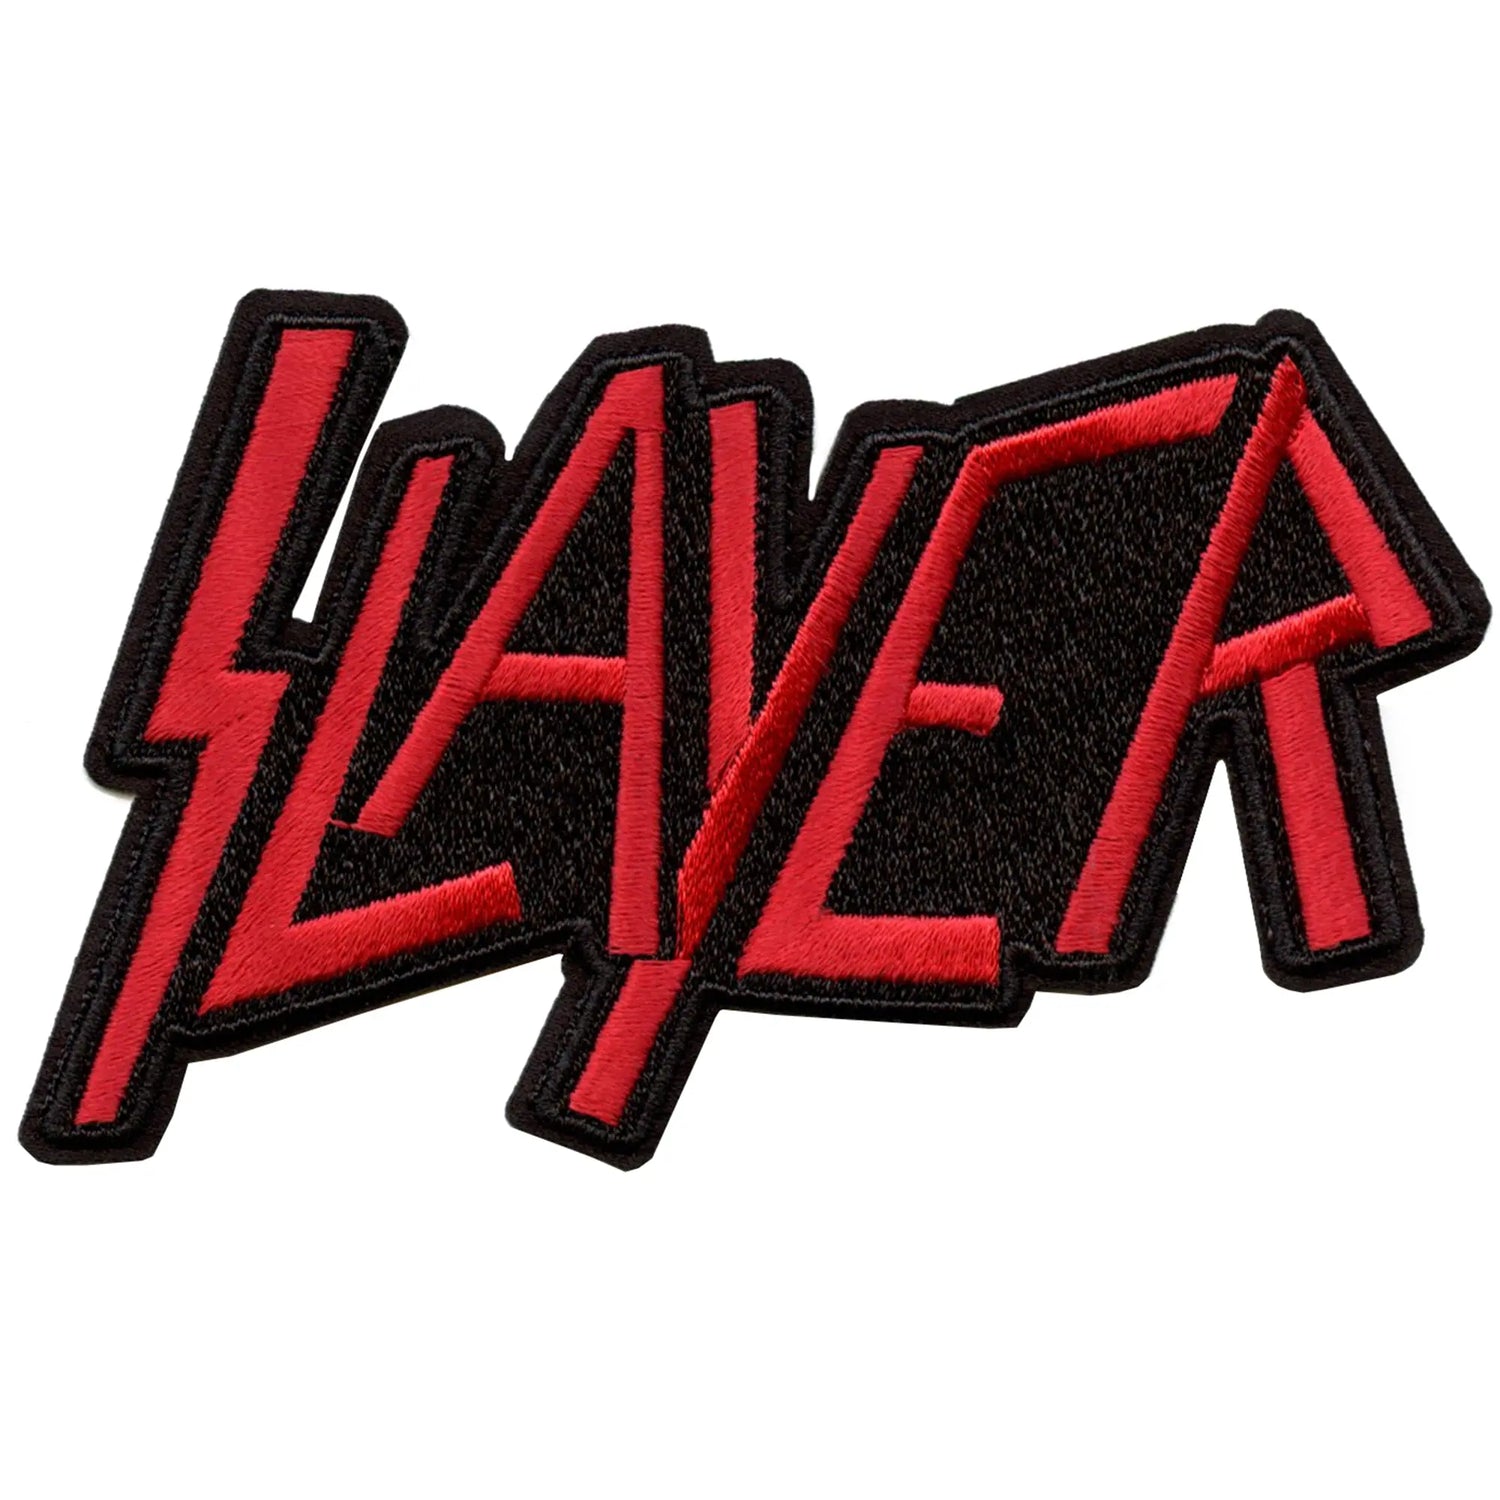 Slayer Music Patches